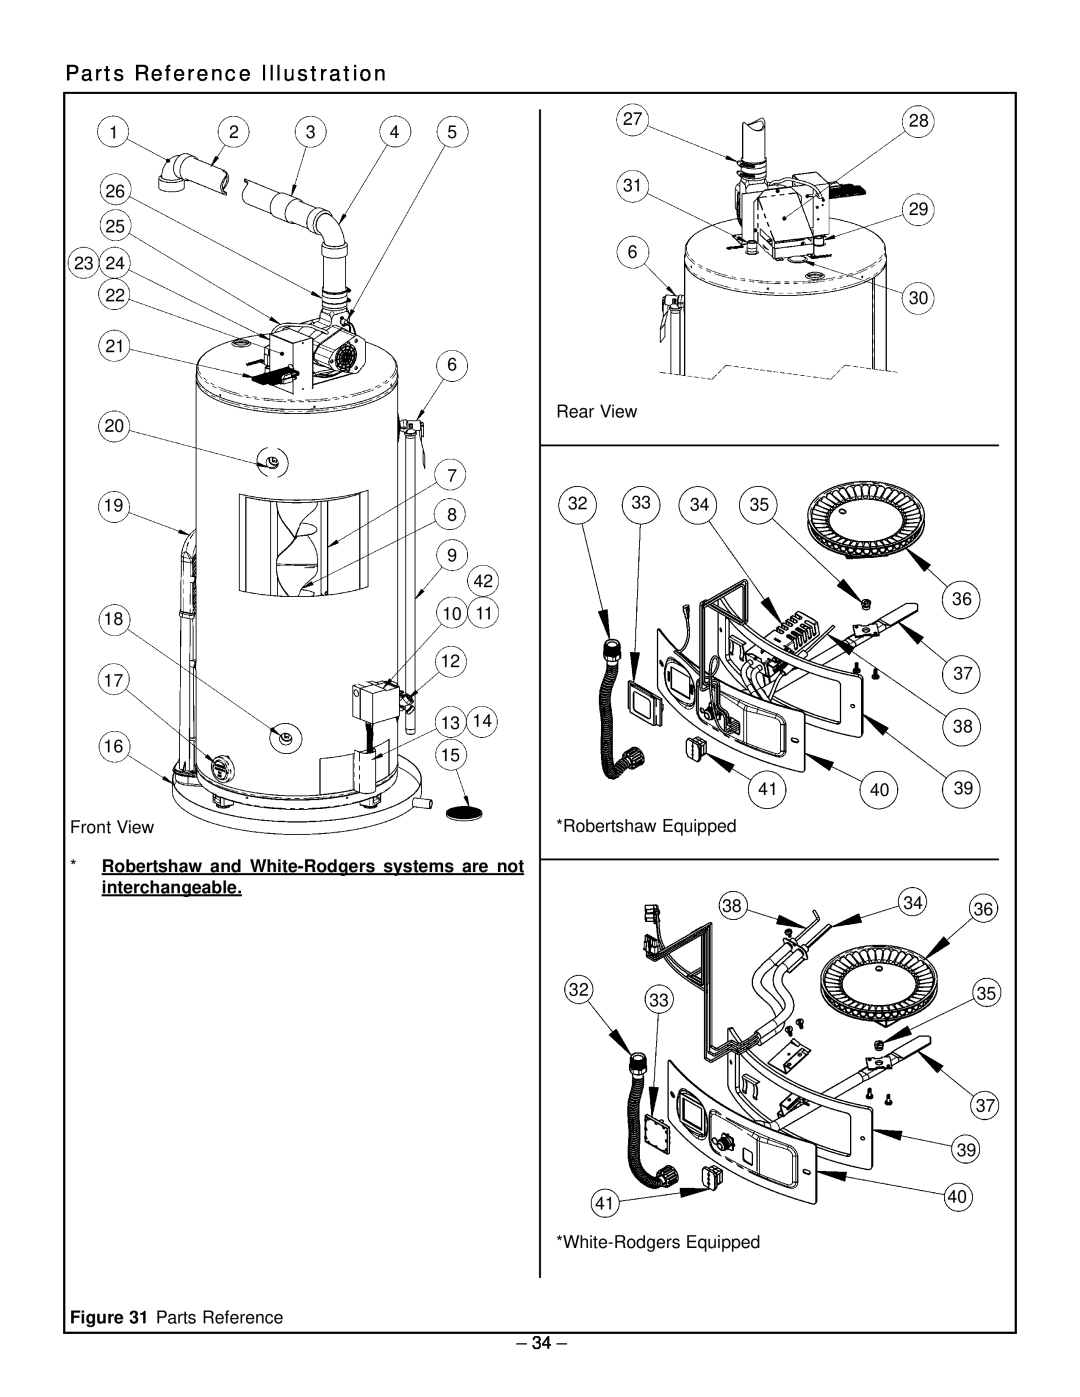 GSW 319594-000 manual Parts Reference Illustration, Robertshaw and White-Rodgerssystems are not, interchangeable 